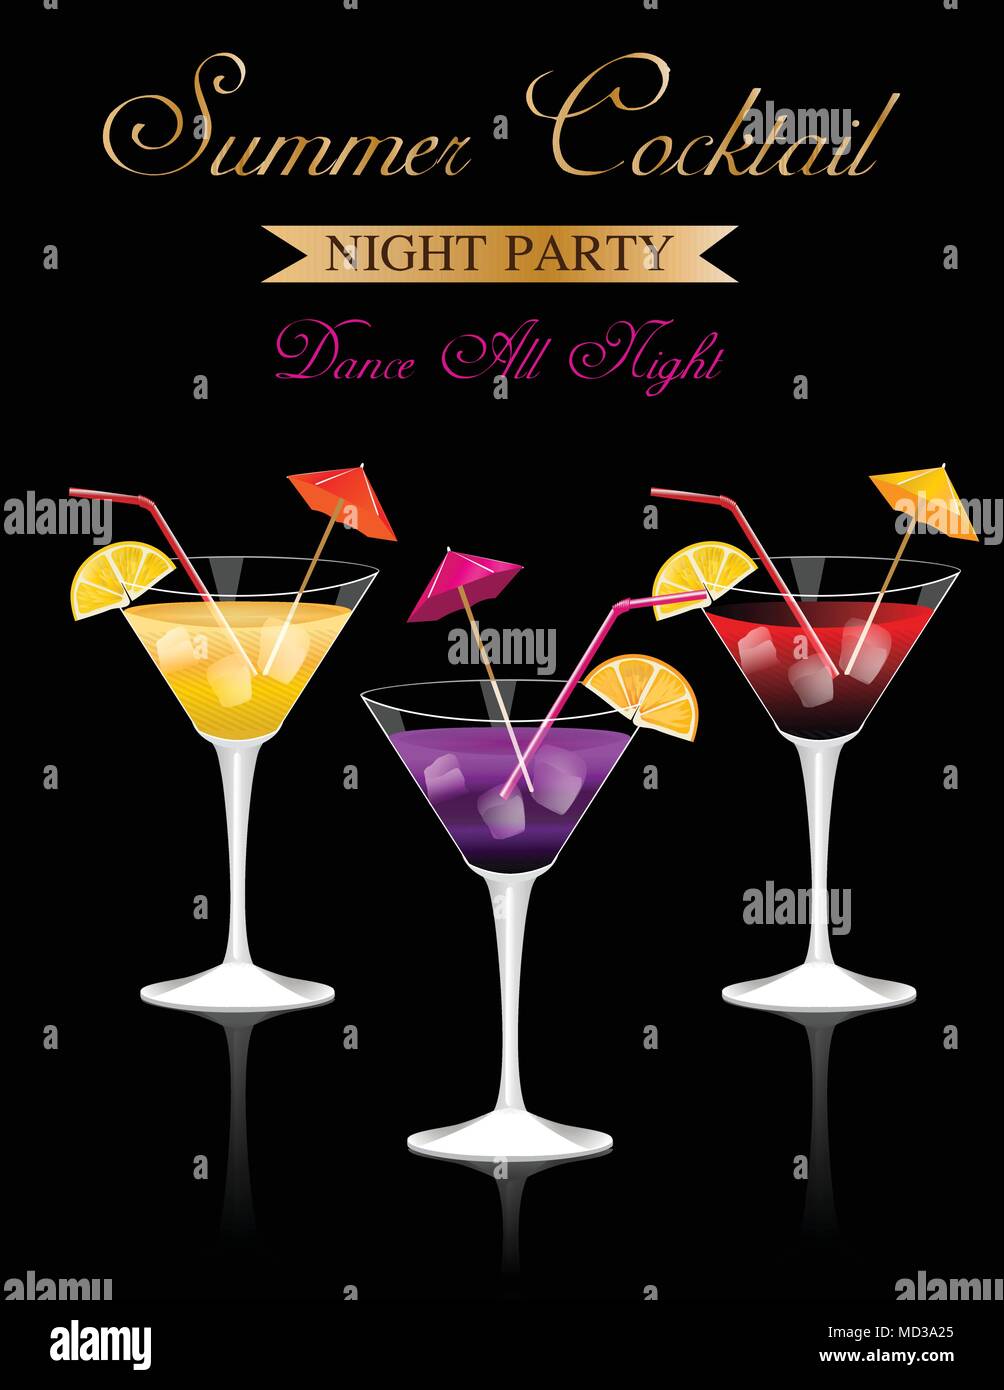 Summer Cocktail Party poster with alcohol drinks in glasses on black background Stock Vector